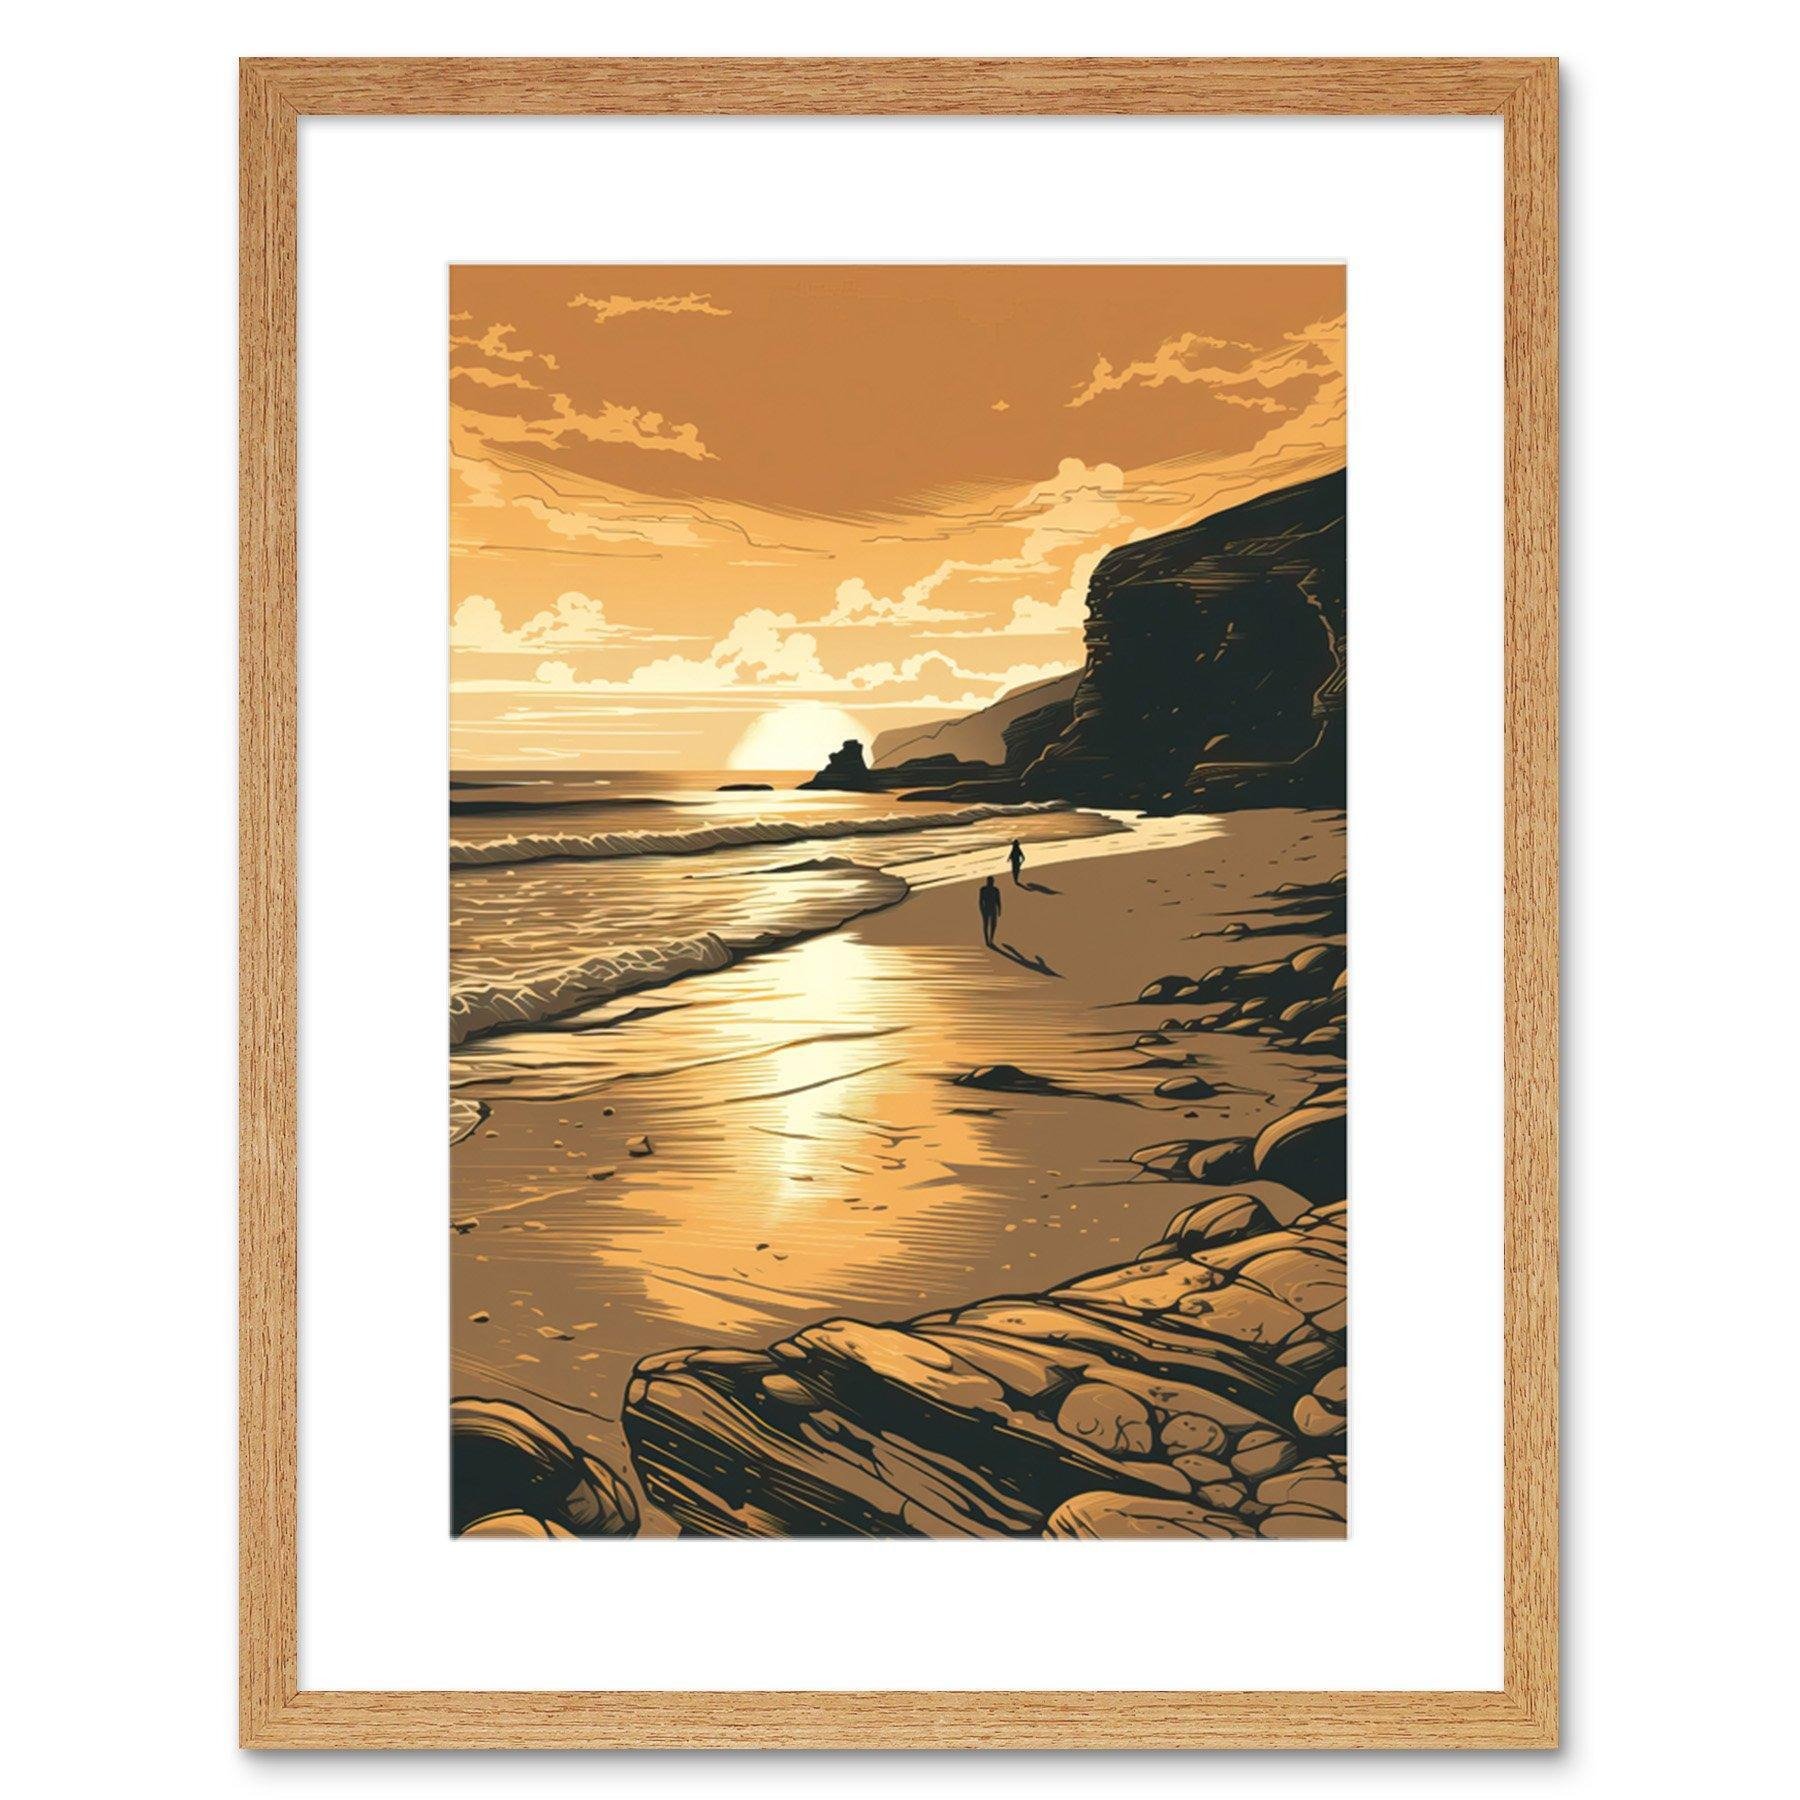 Couple walking on the Beach at Sunset Illustration Artwork Framed Wall Art Print 9X7 Inch - image 1